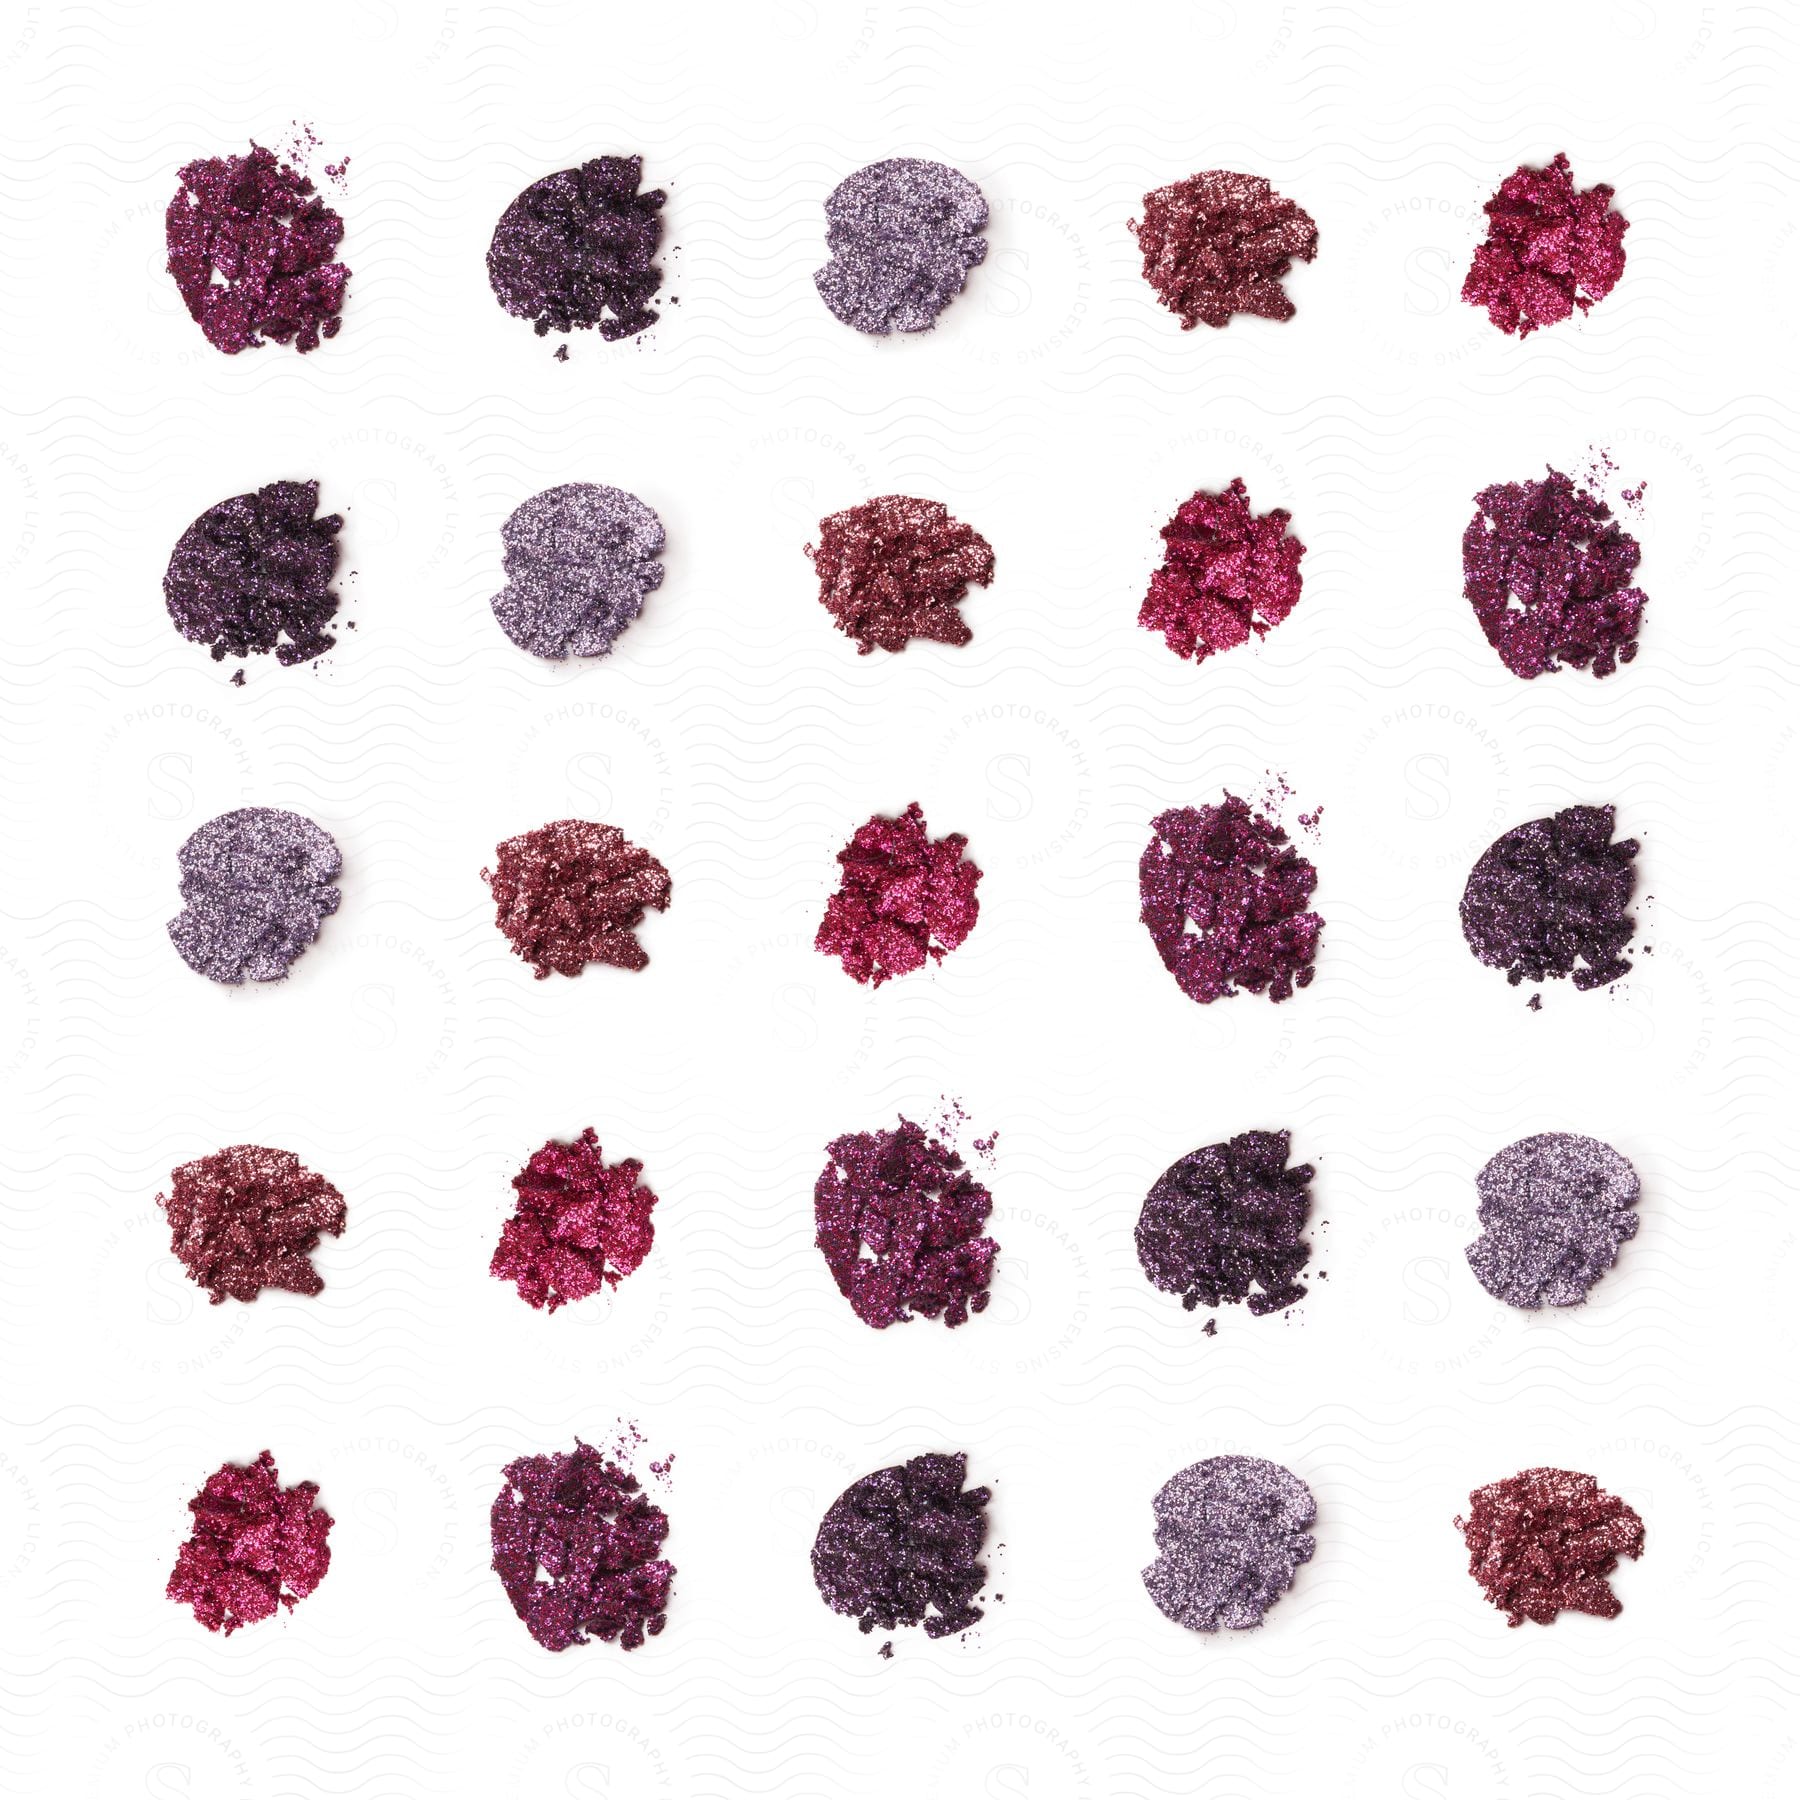 Stock photo of eyeshadow color swatches in shades of pink and purple